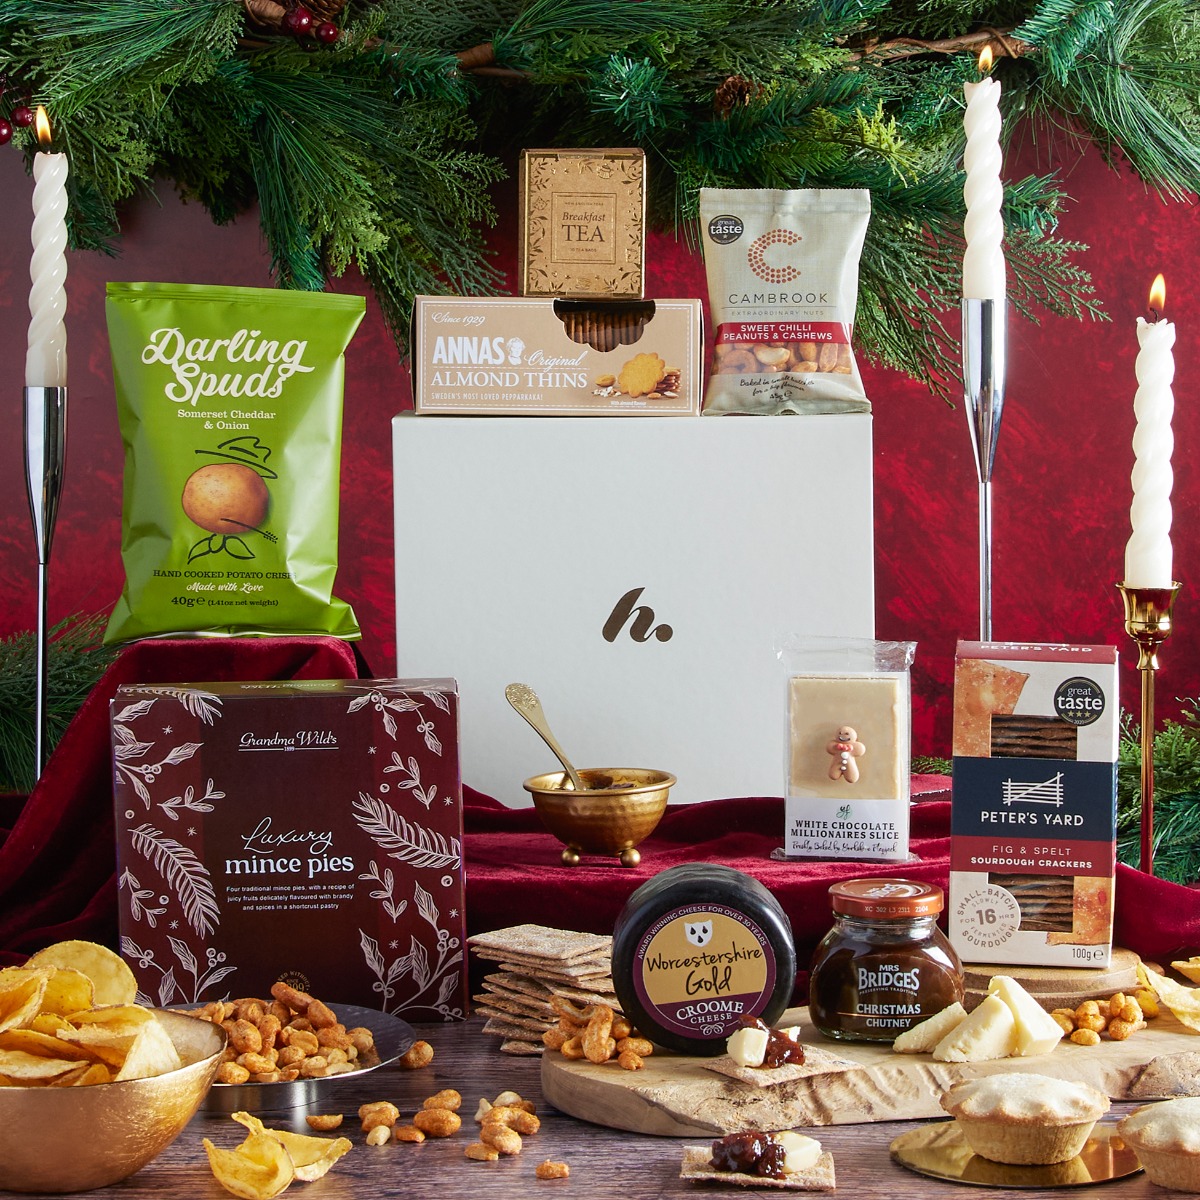 The Christmas Season Selection Gift Box with contents on display as a recommended Christmas gifts for dad